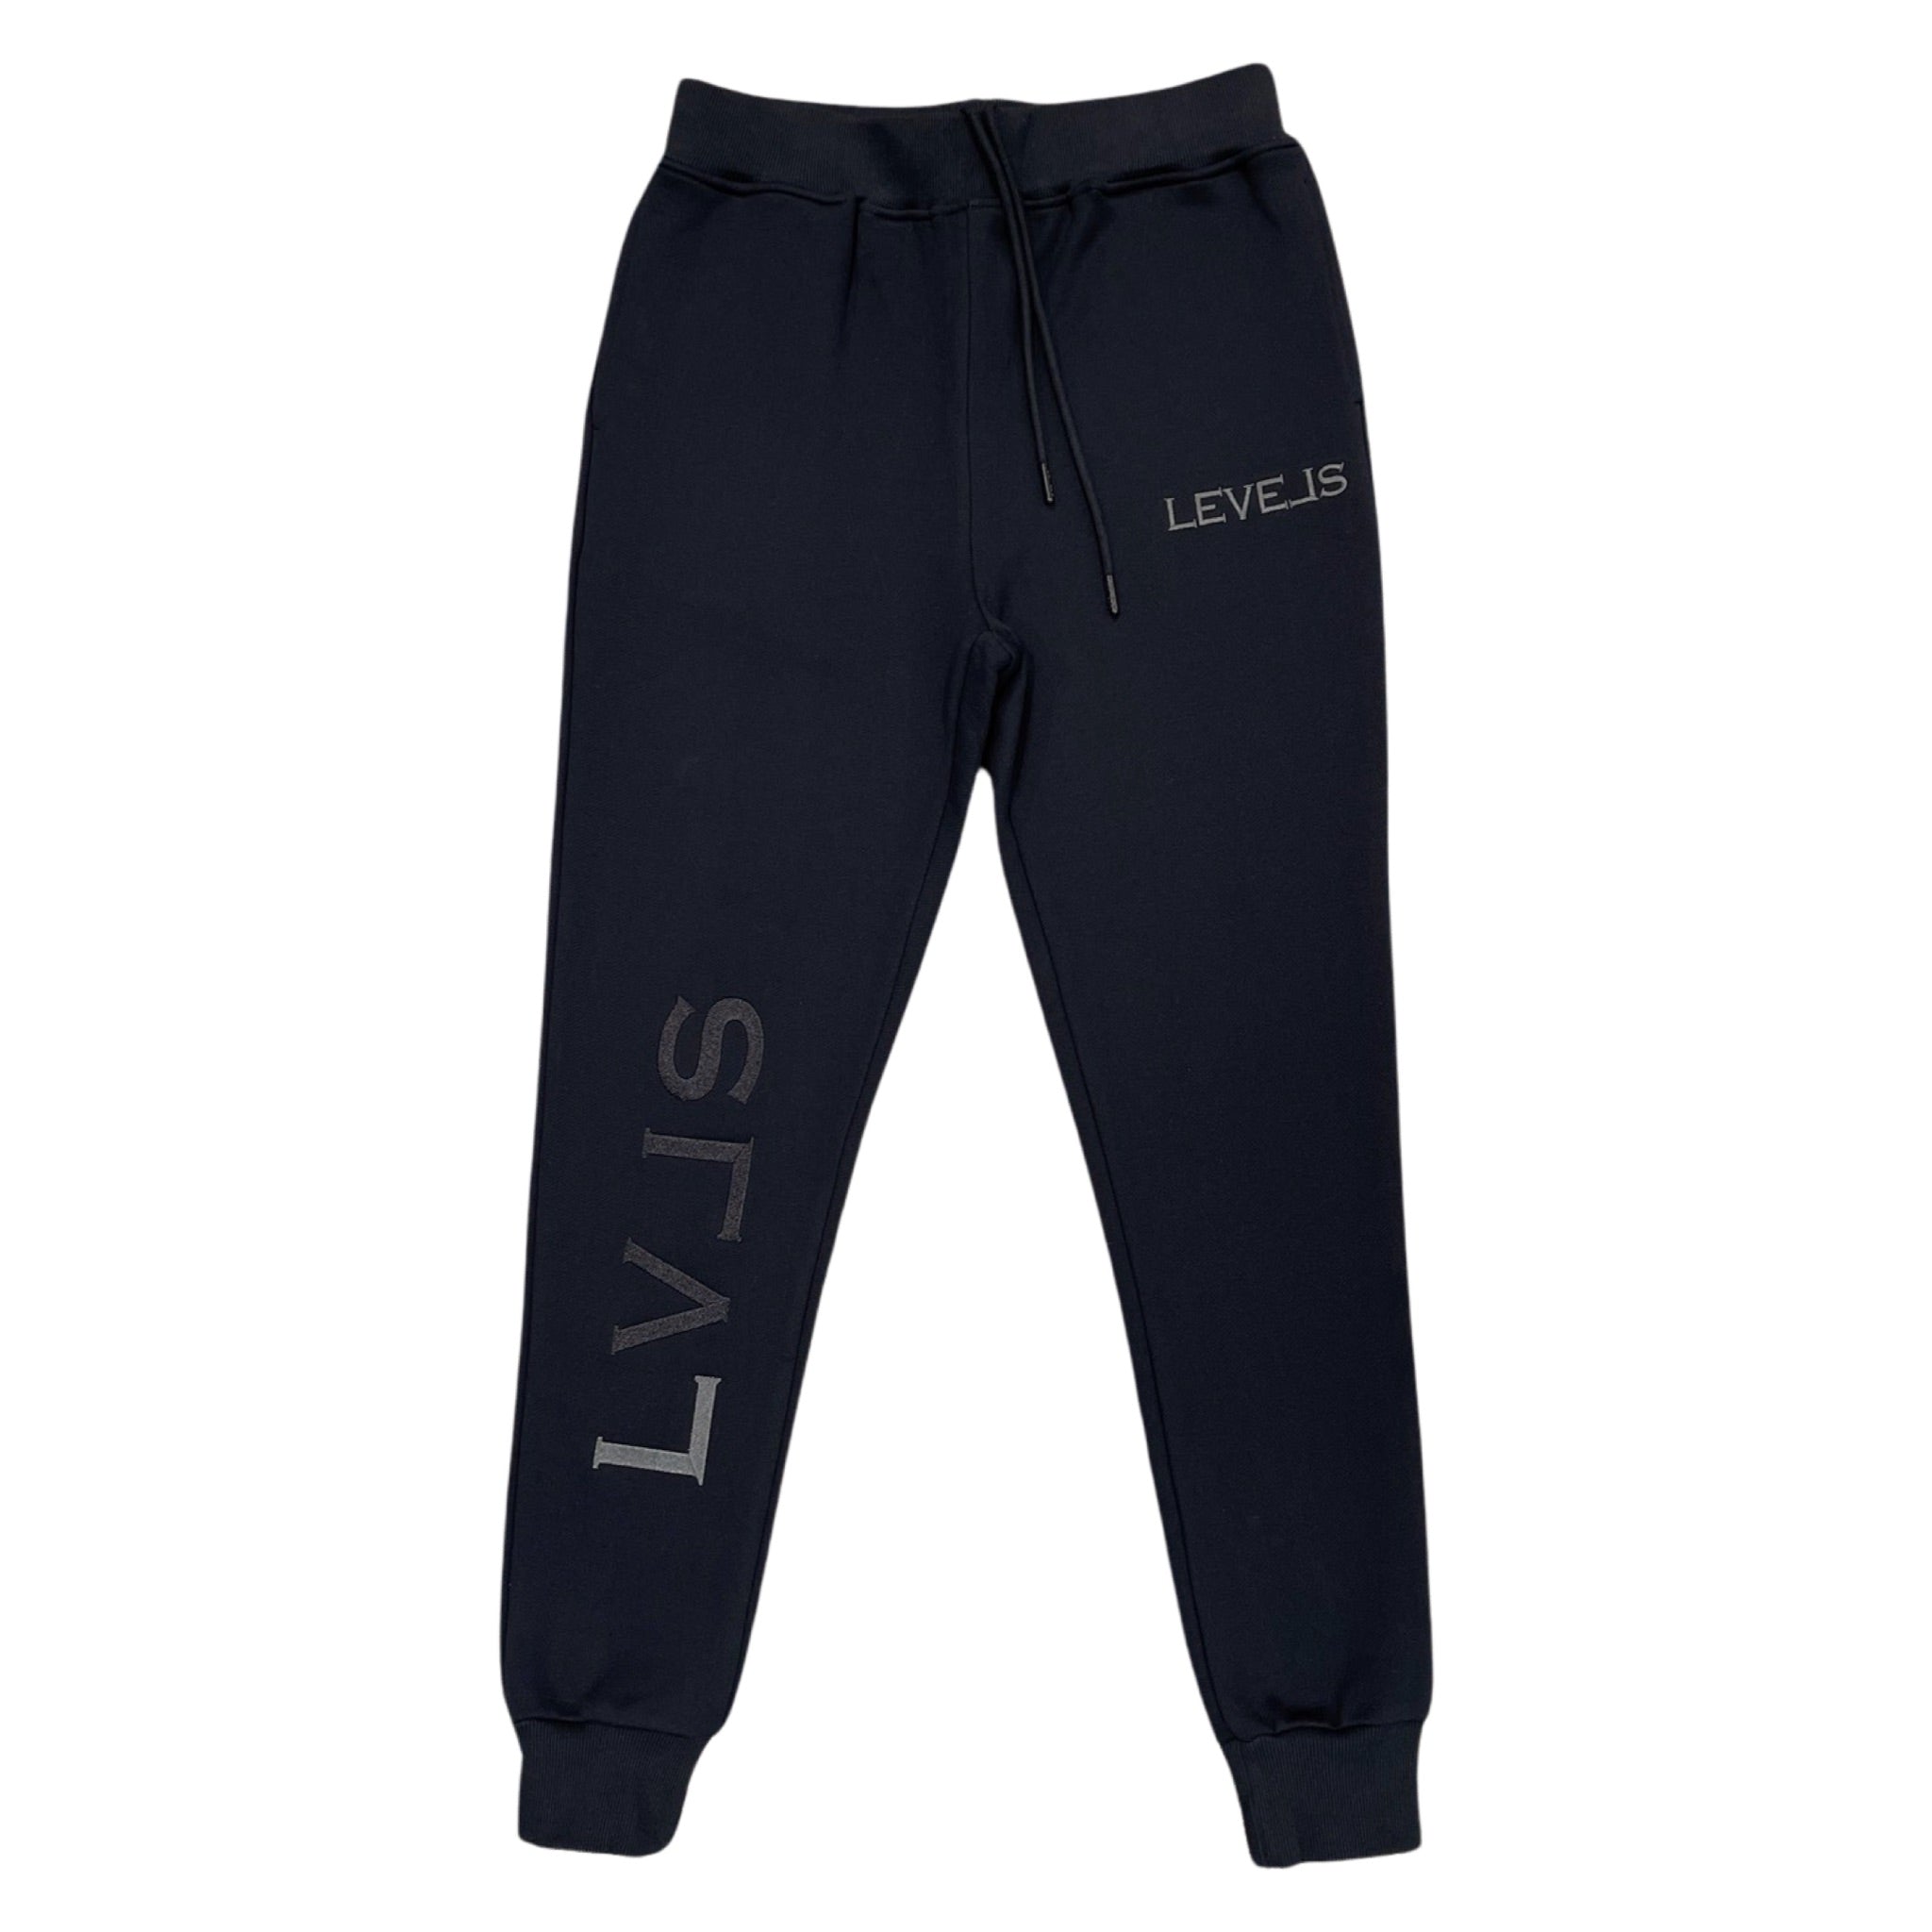 LUXE LVLS EMBROIDERED JOGGERS